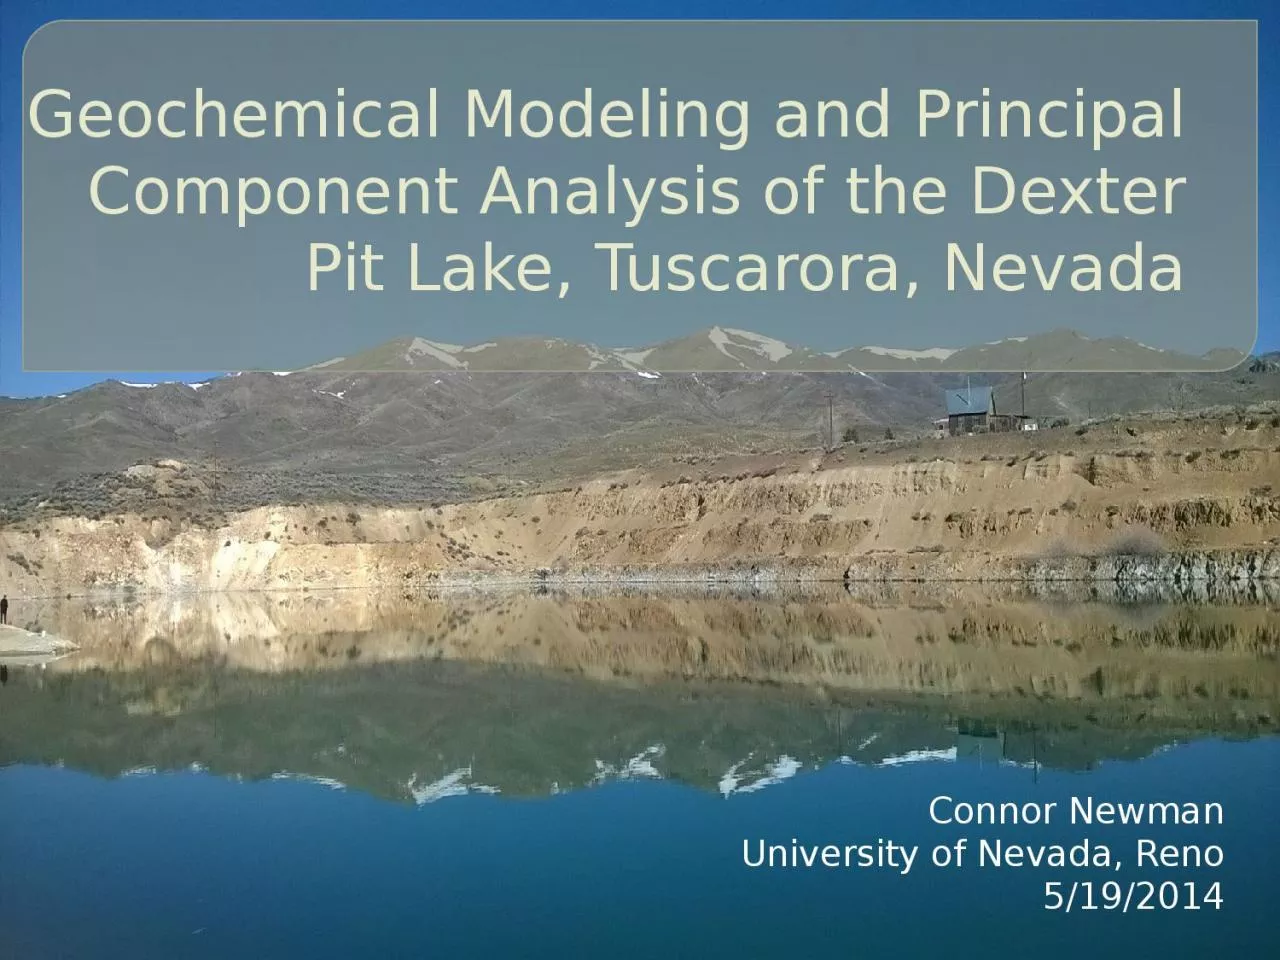 Geochemical Modeling and Principal Component Analysis of the Dexter Pit Lake, Tuscarora,